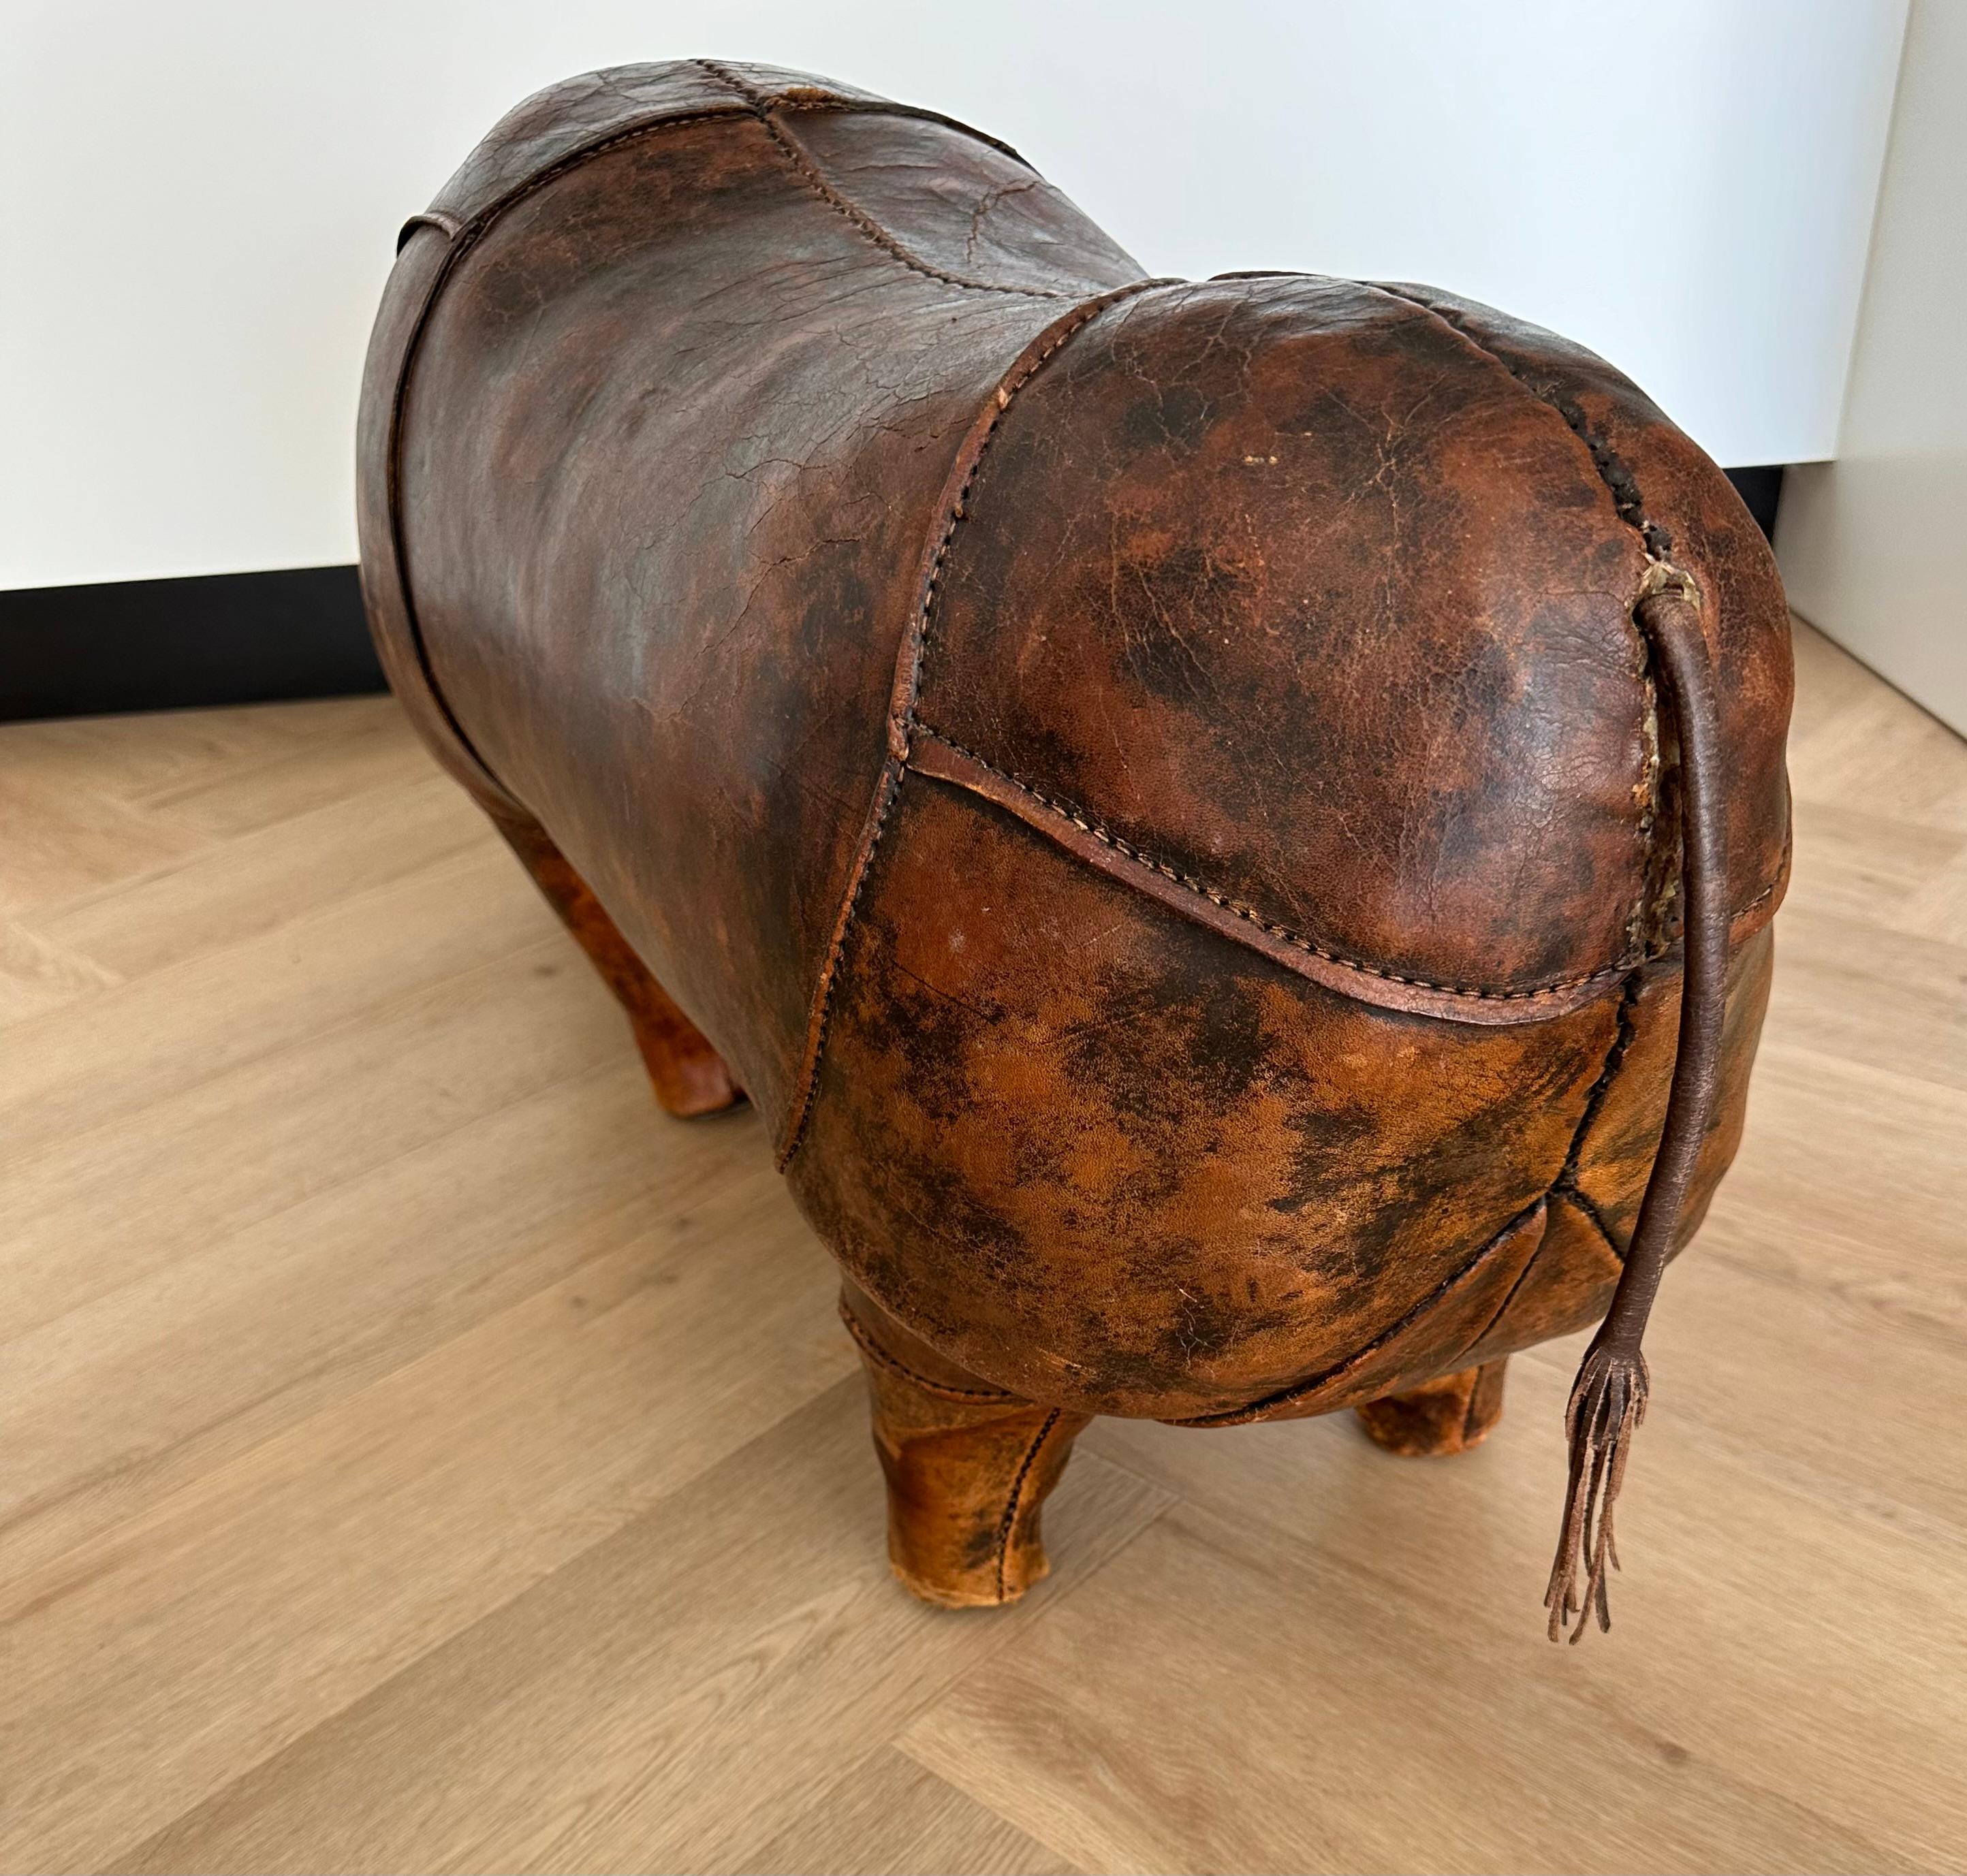 English Largest Leather Rhino Stool by Dimitri Omersa for Abercrombie & Fitch, Signed For Sale